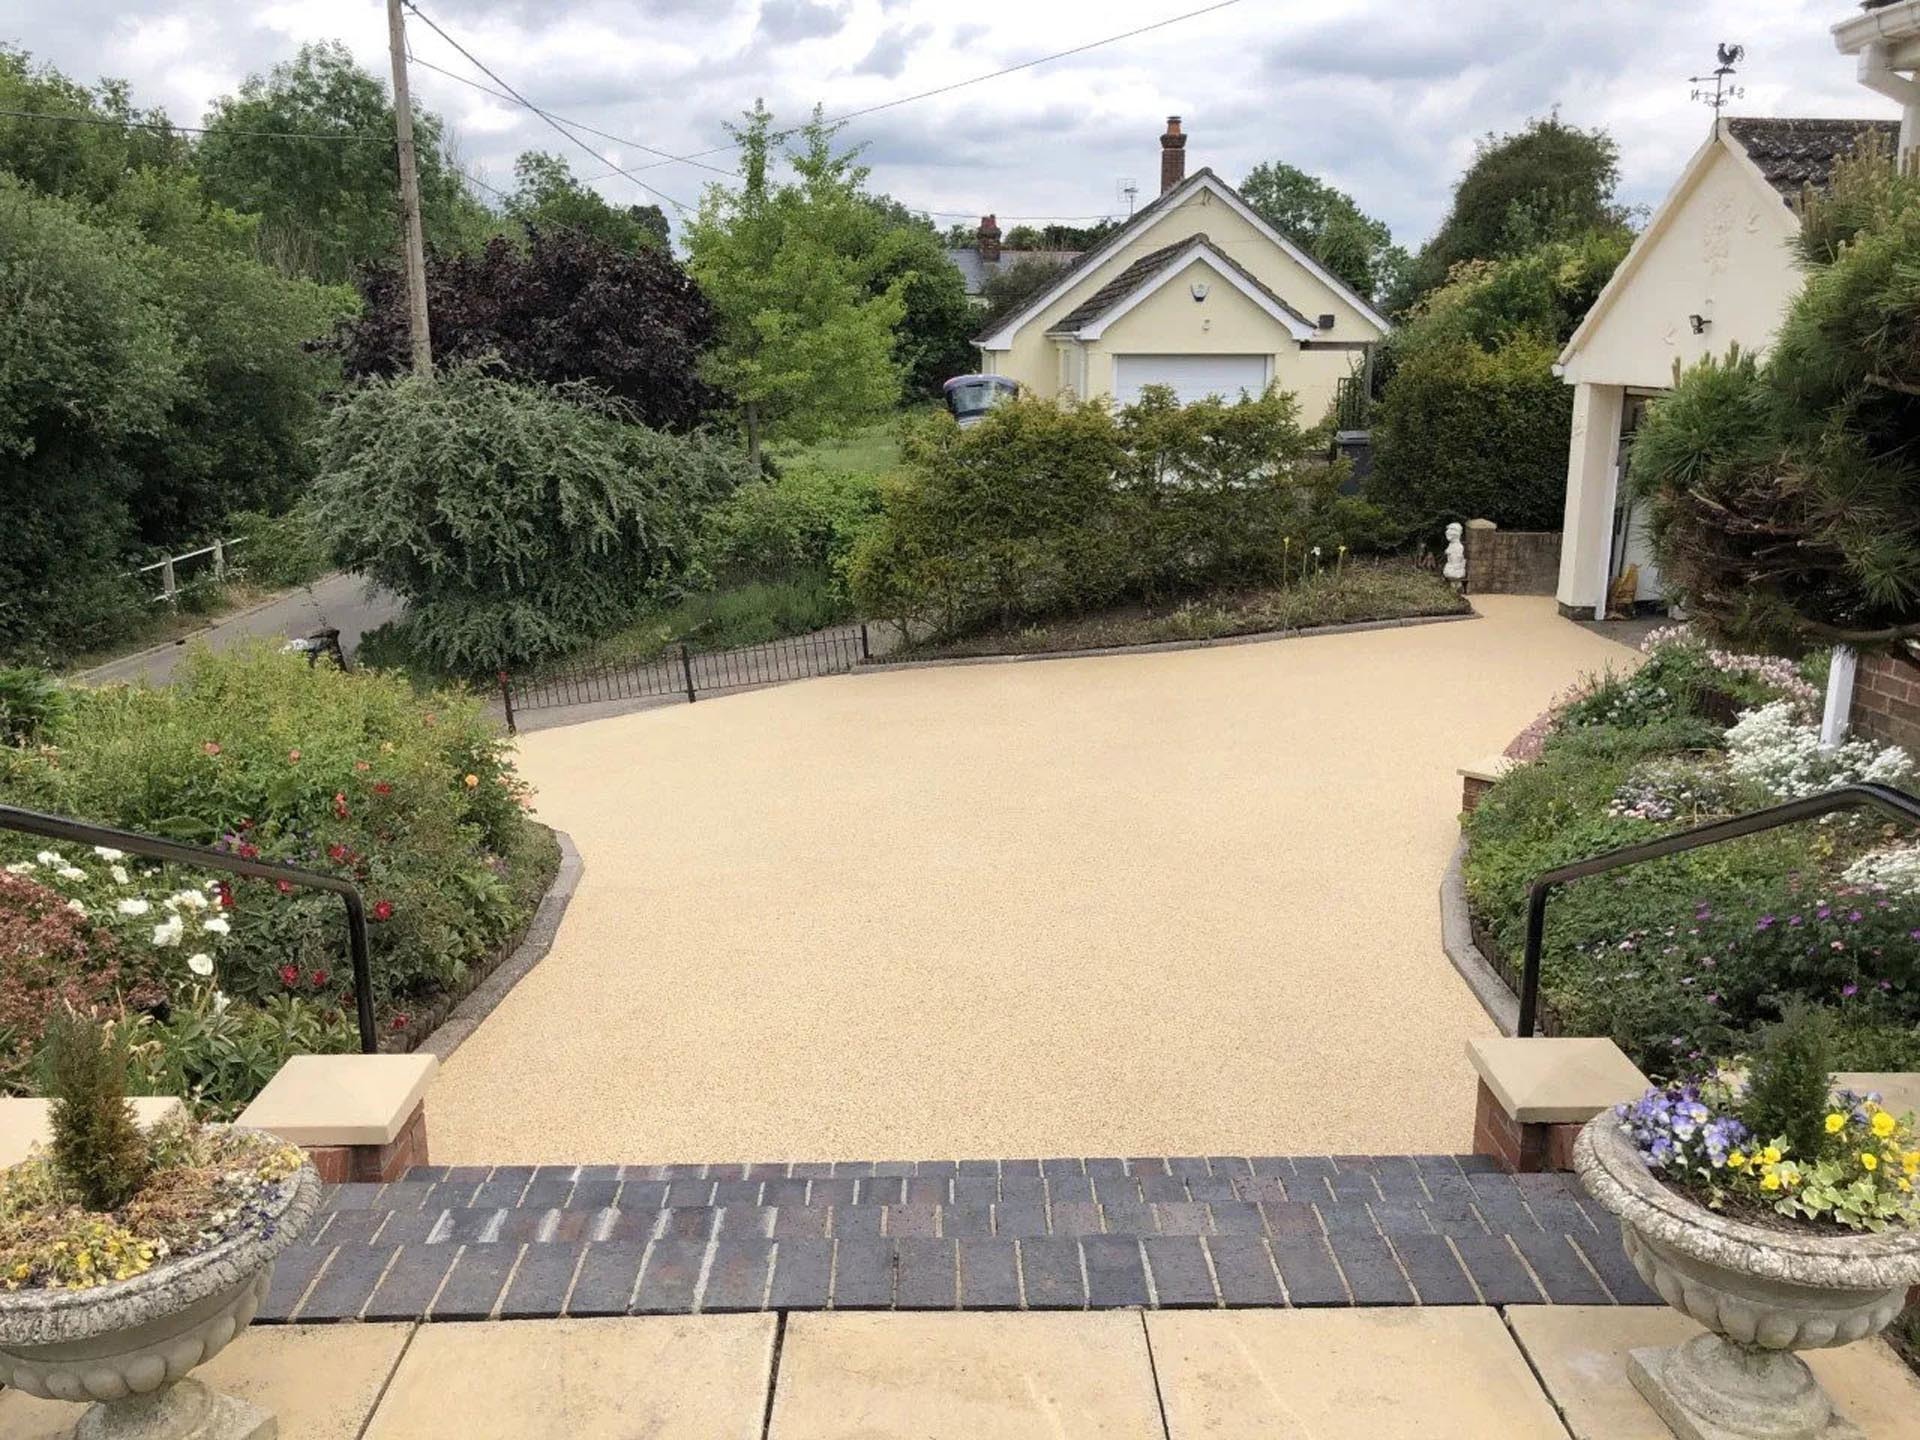 Resin bonded driveways Ely Cambs Paving